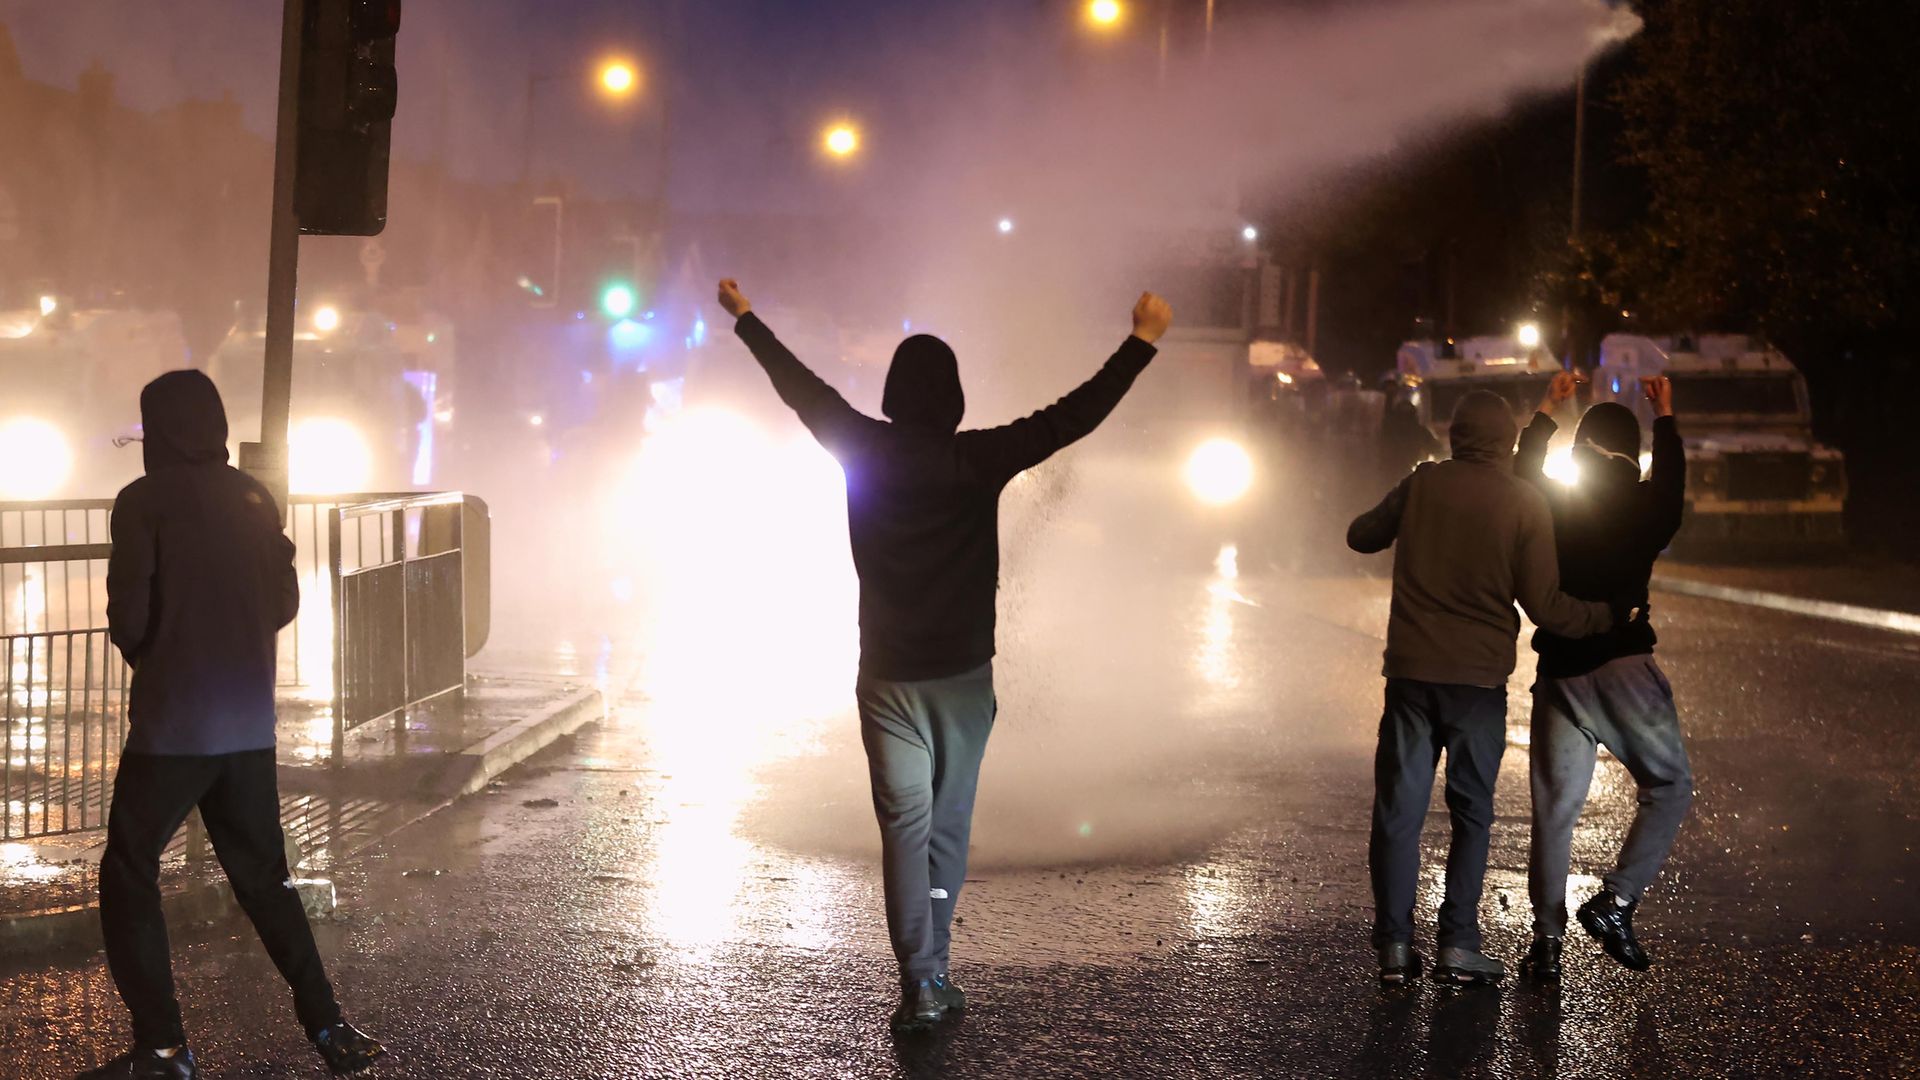 The PSNI use a water cannon on youths on the Springfield road, during further unrest in Belfast - Credit: PA